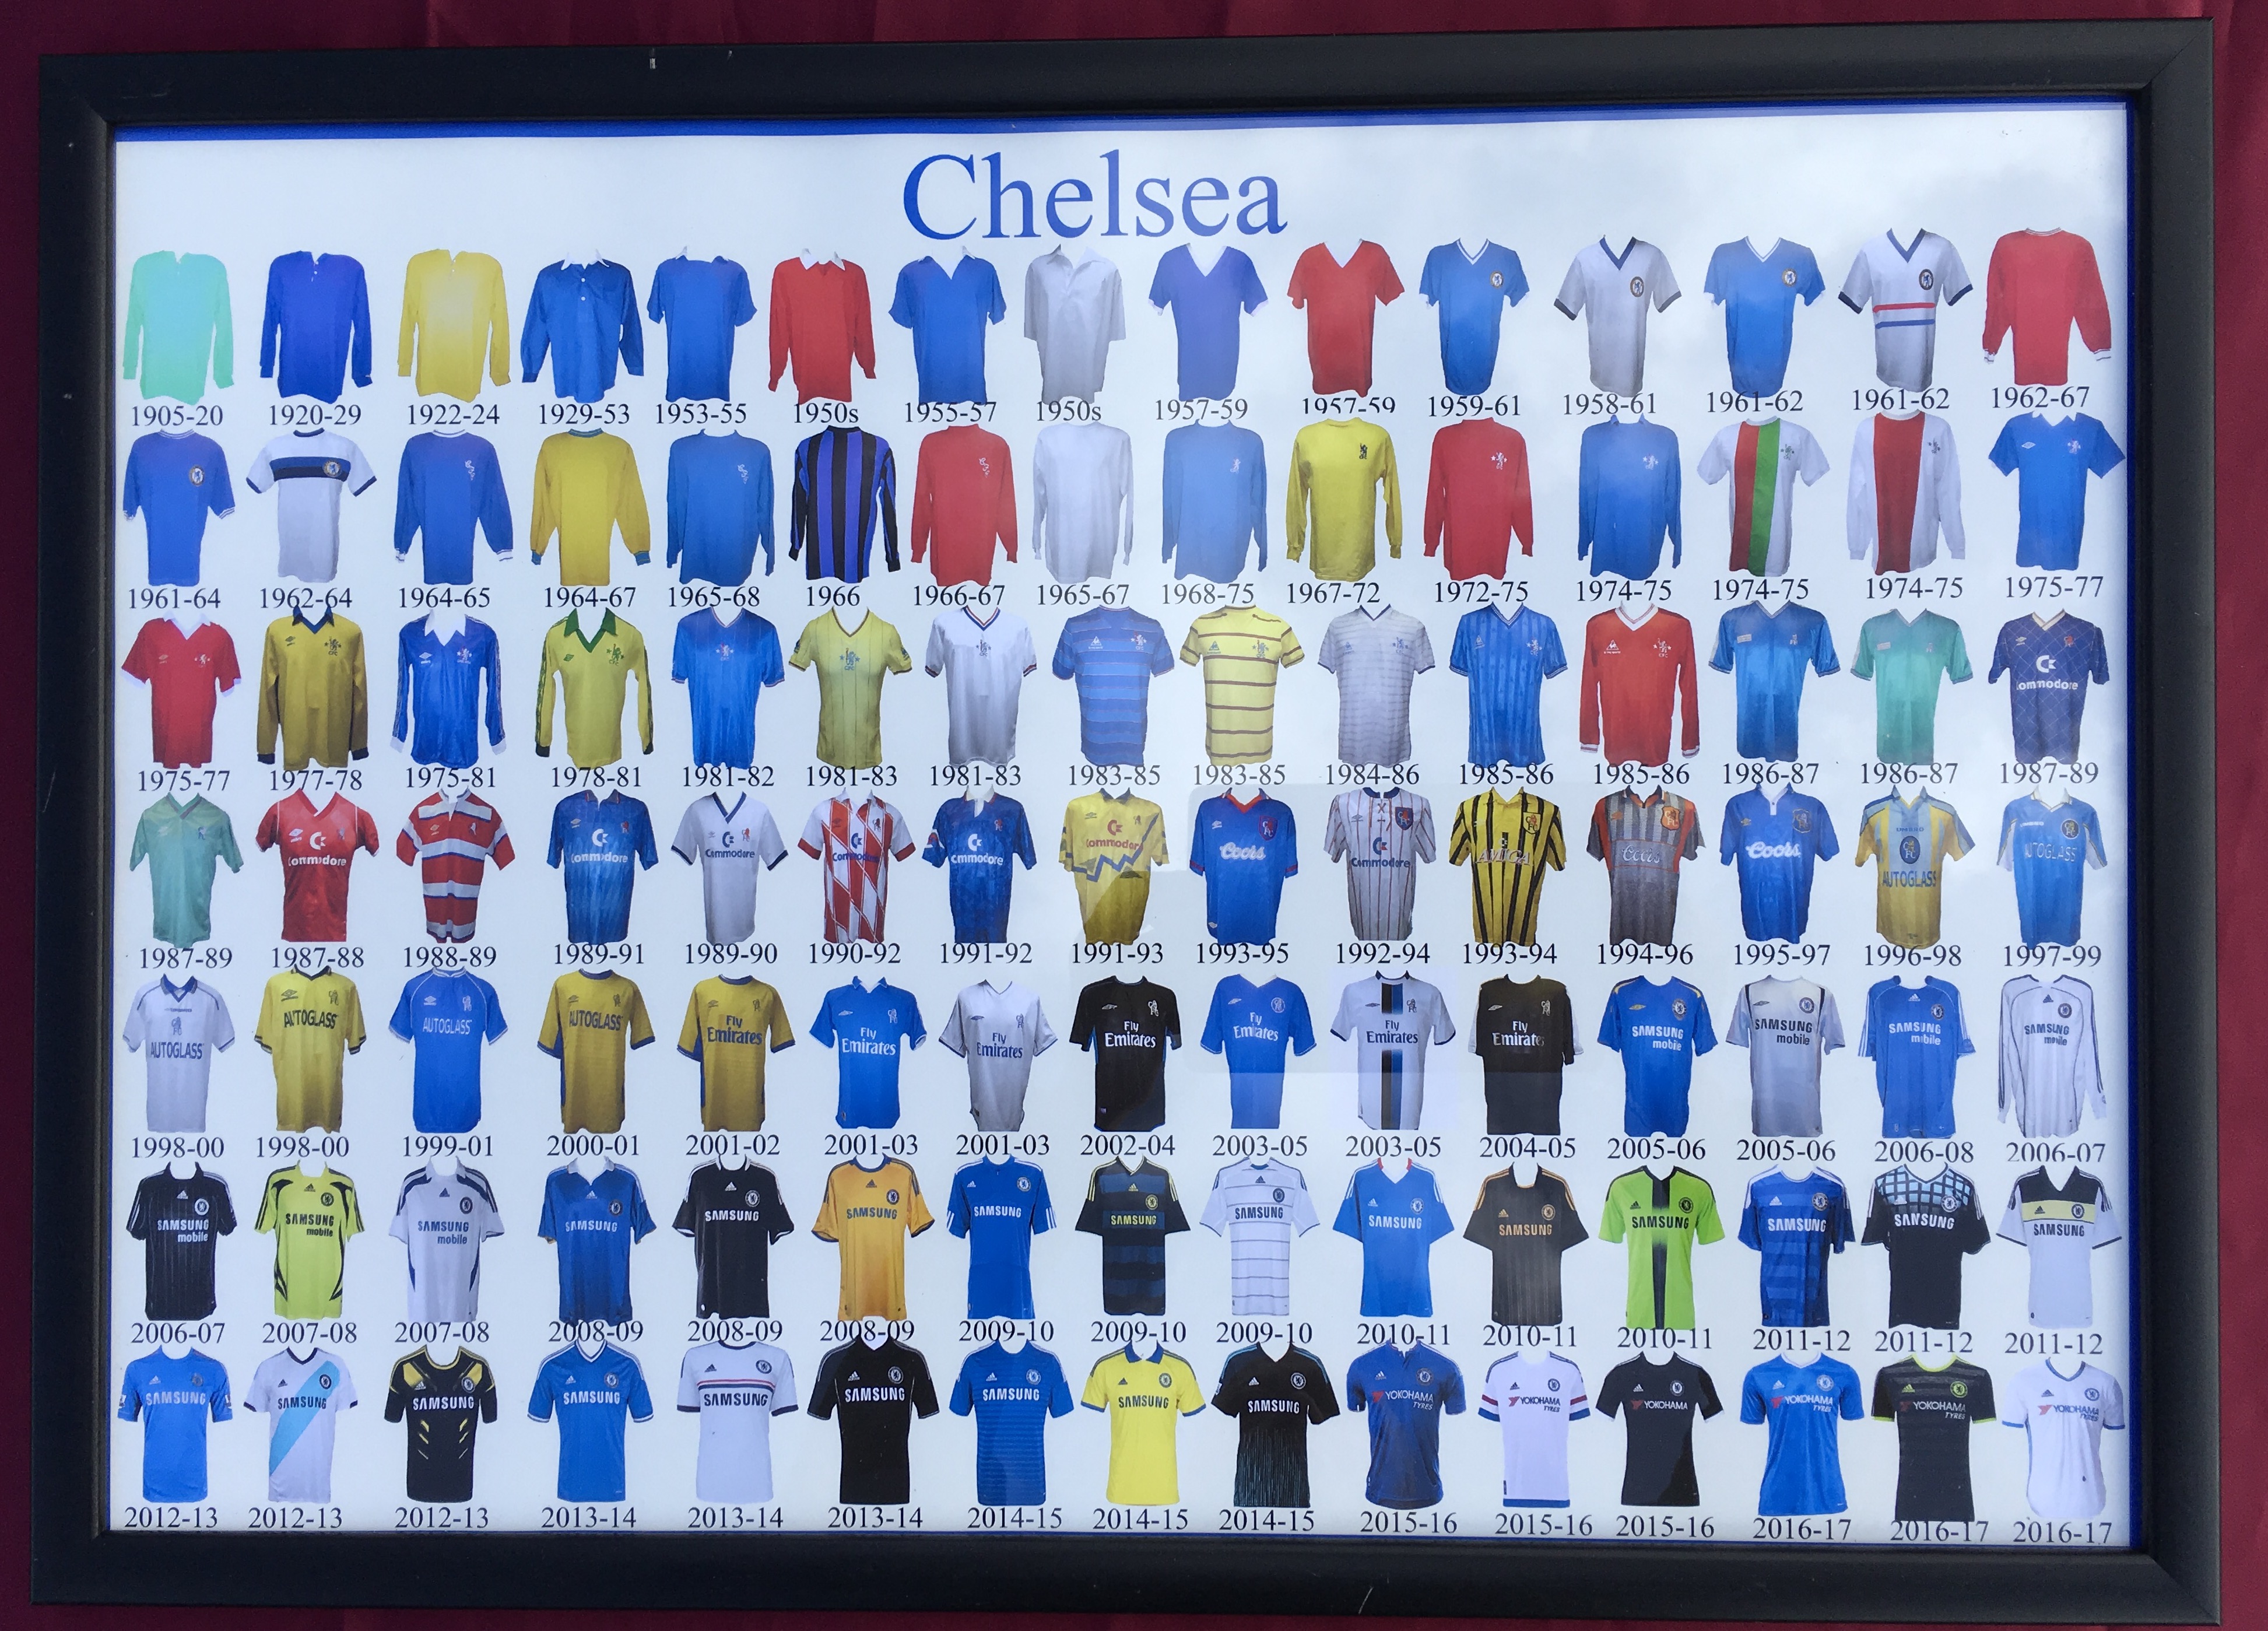 chelsea shirts over the years